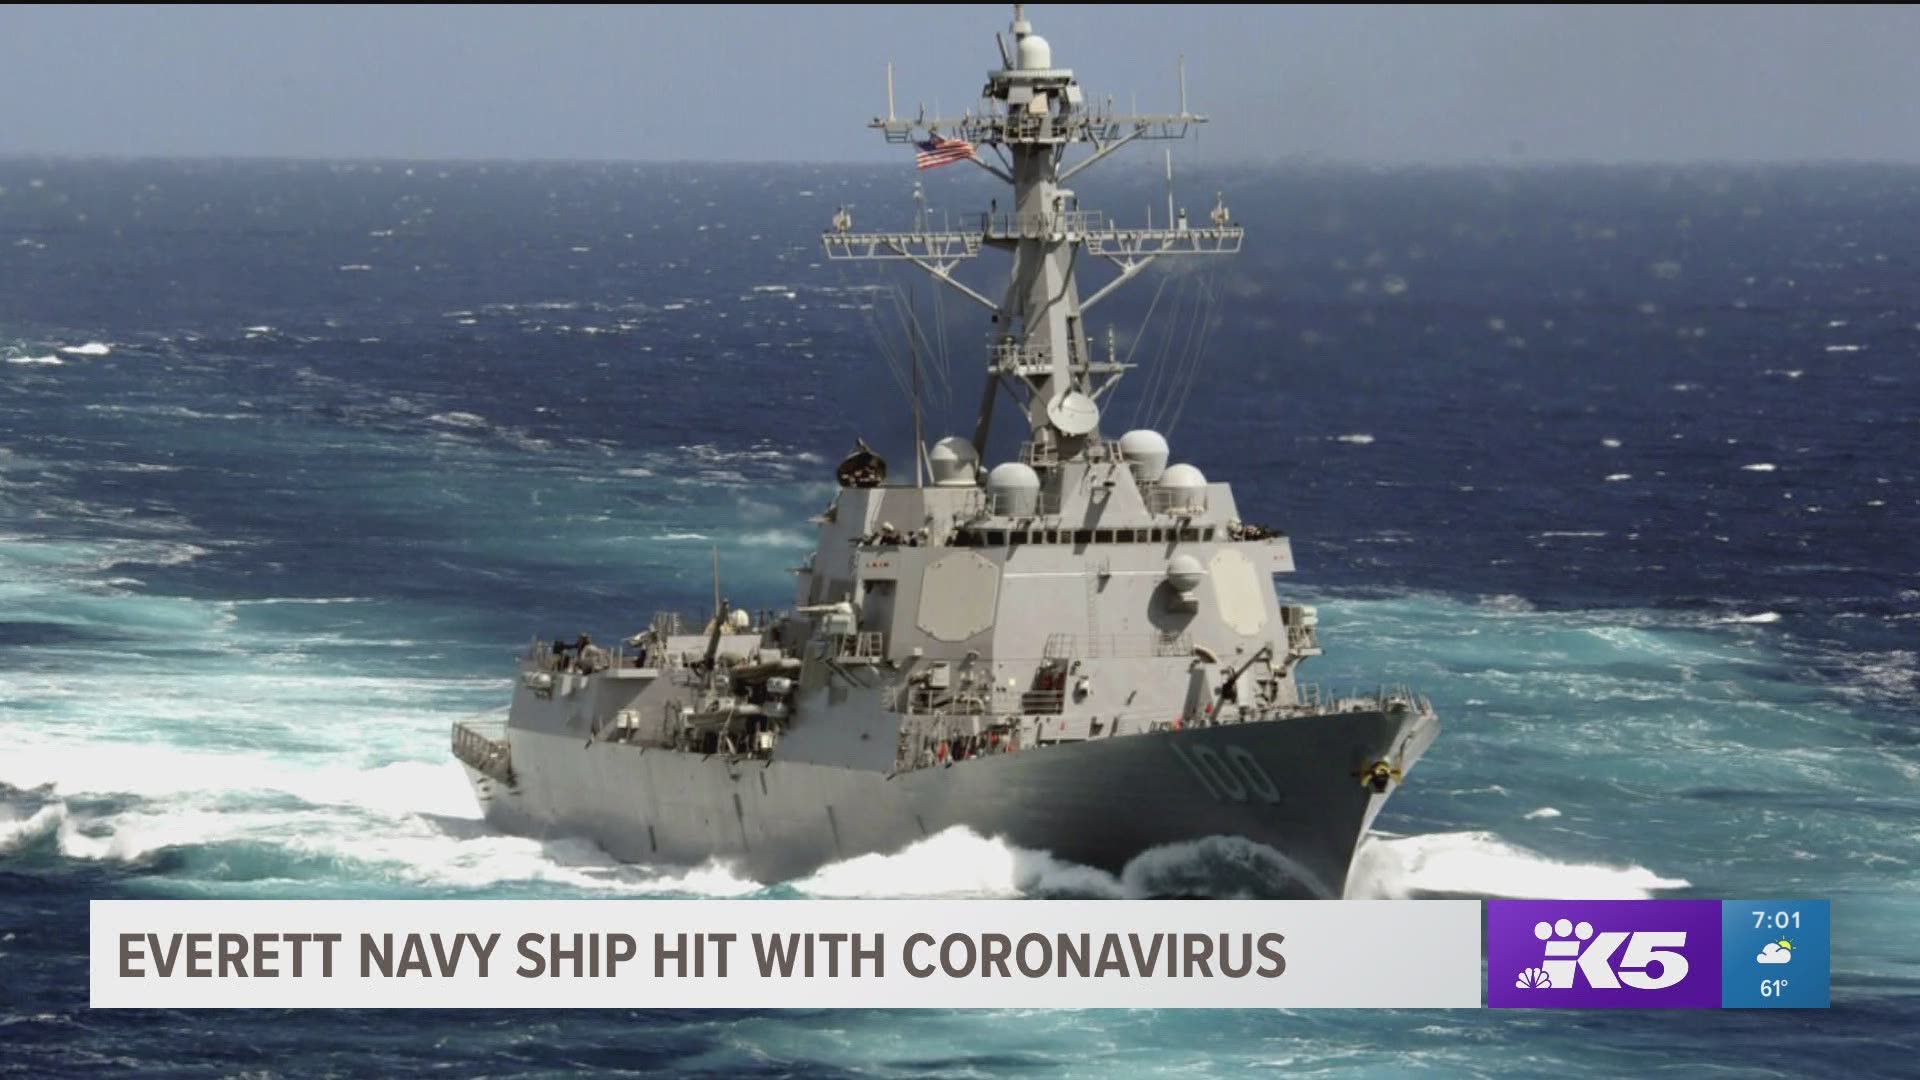 The crew was on a mission in Central America when the outbreak hit. On Friday, 18 crewmembers tested positive for coronavirus. On Monday, that number rose to 47